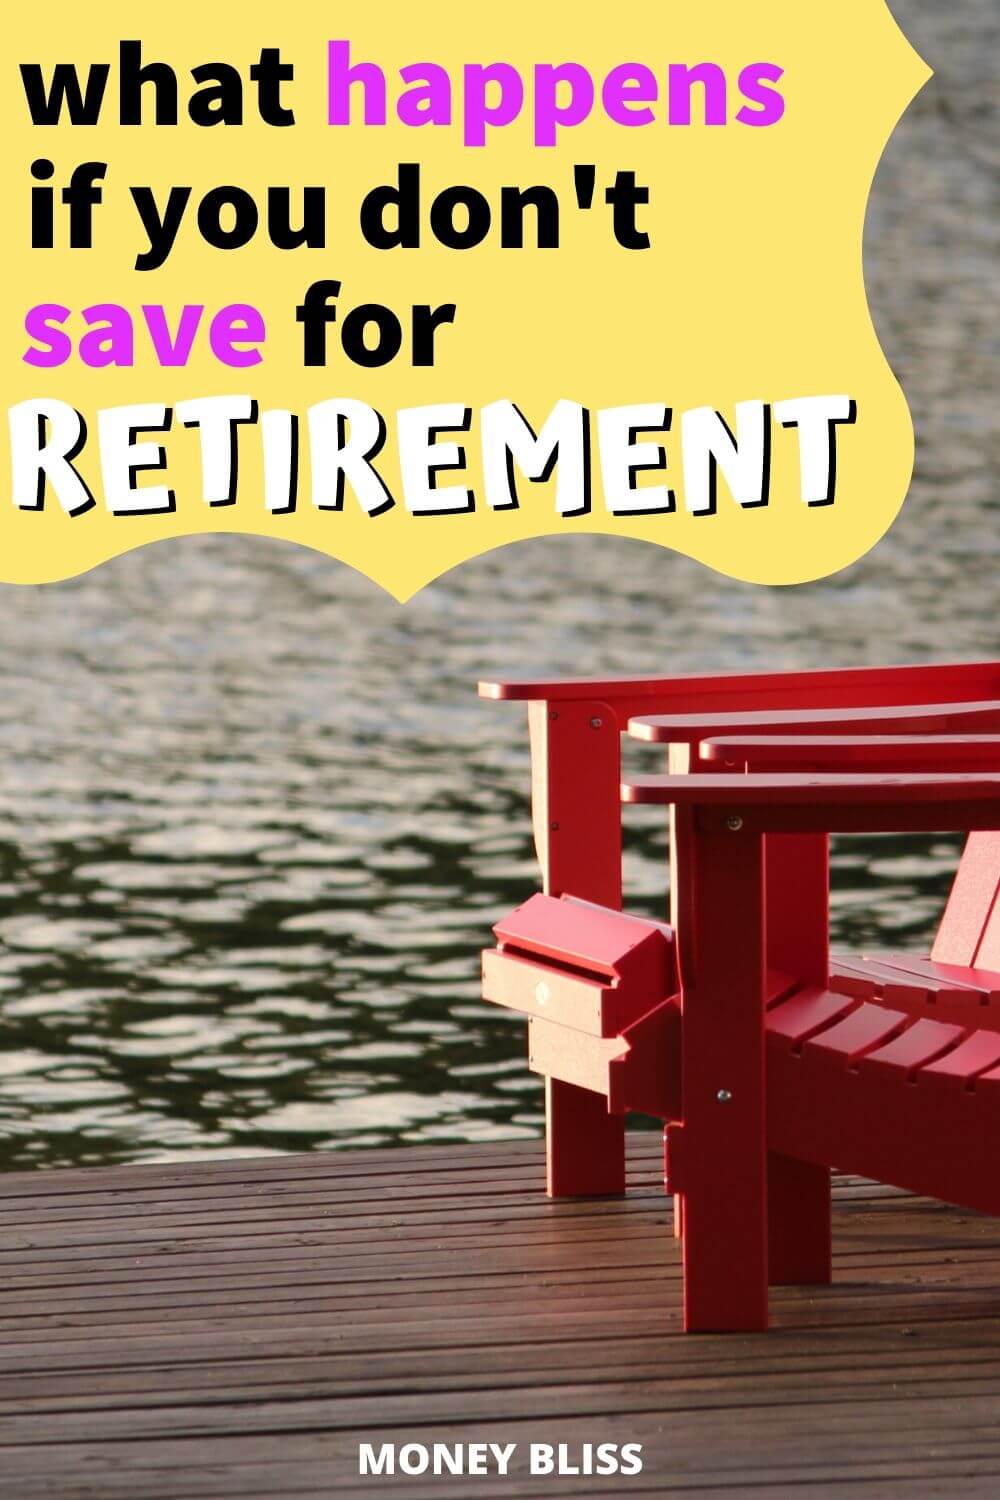 If you are worried about not having enough retirement money, then you need to learn what happens if you don't save for retirement. Even if don't have enough money saved, then learn tips and tricks to survive with no money. Make a plan today to save money before you hit retirement age.